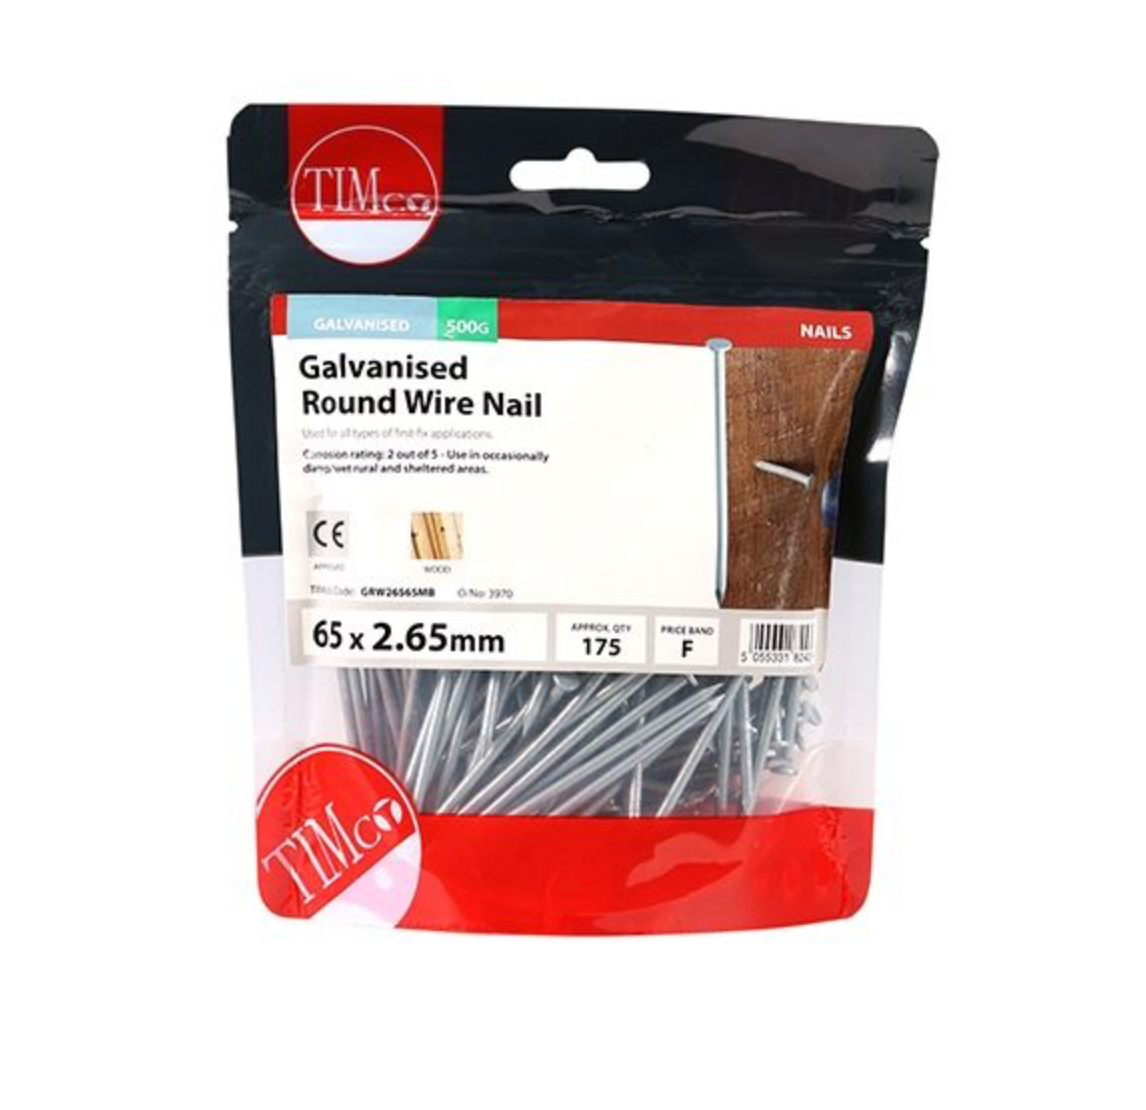 Timco Galvanised Round Wire Nail - various sizes available